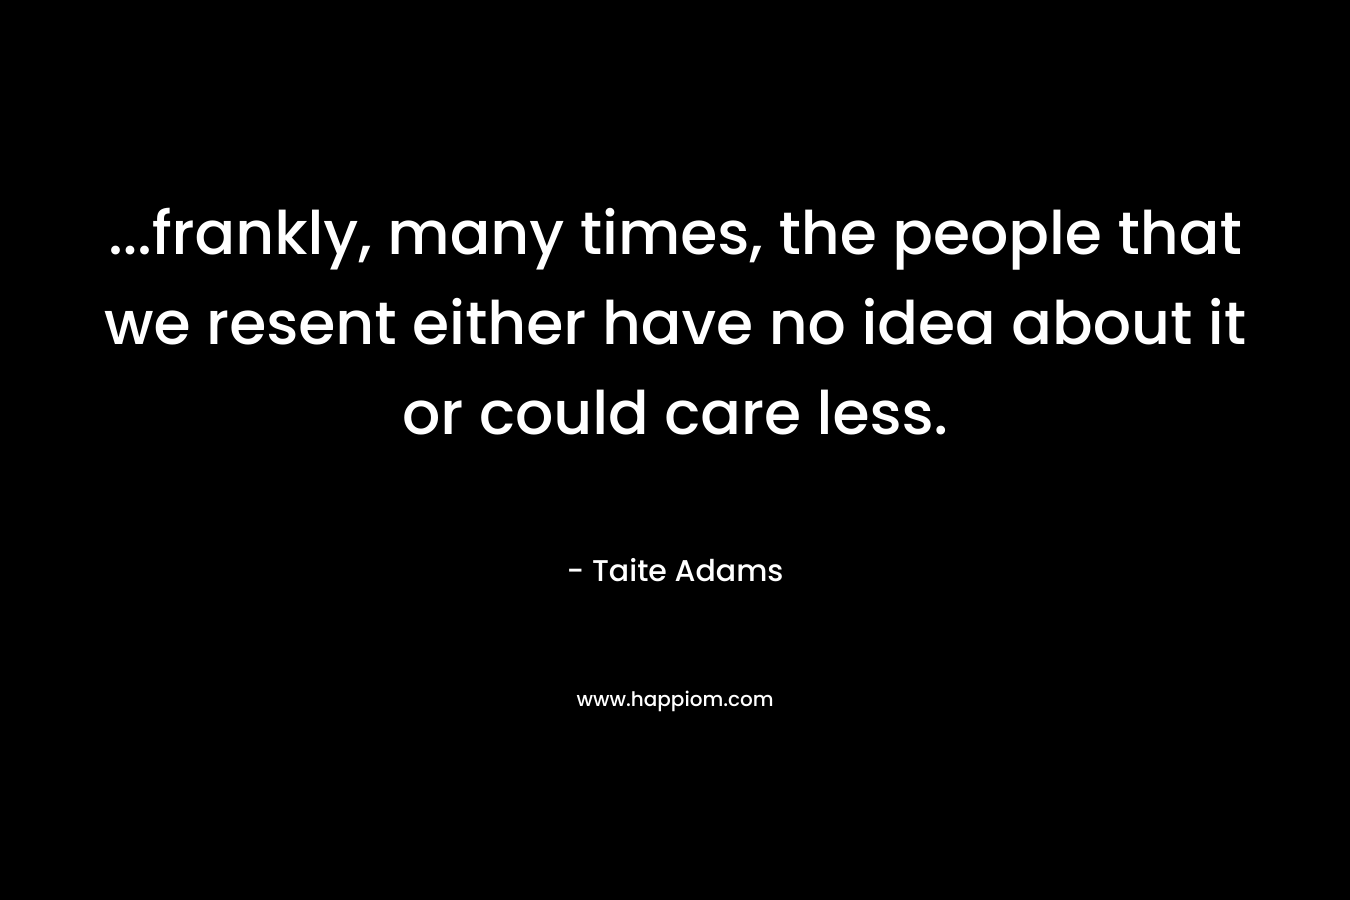 …frankly, many times, the people that we resent either have no idea about it or could care less. – Taite Adams